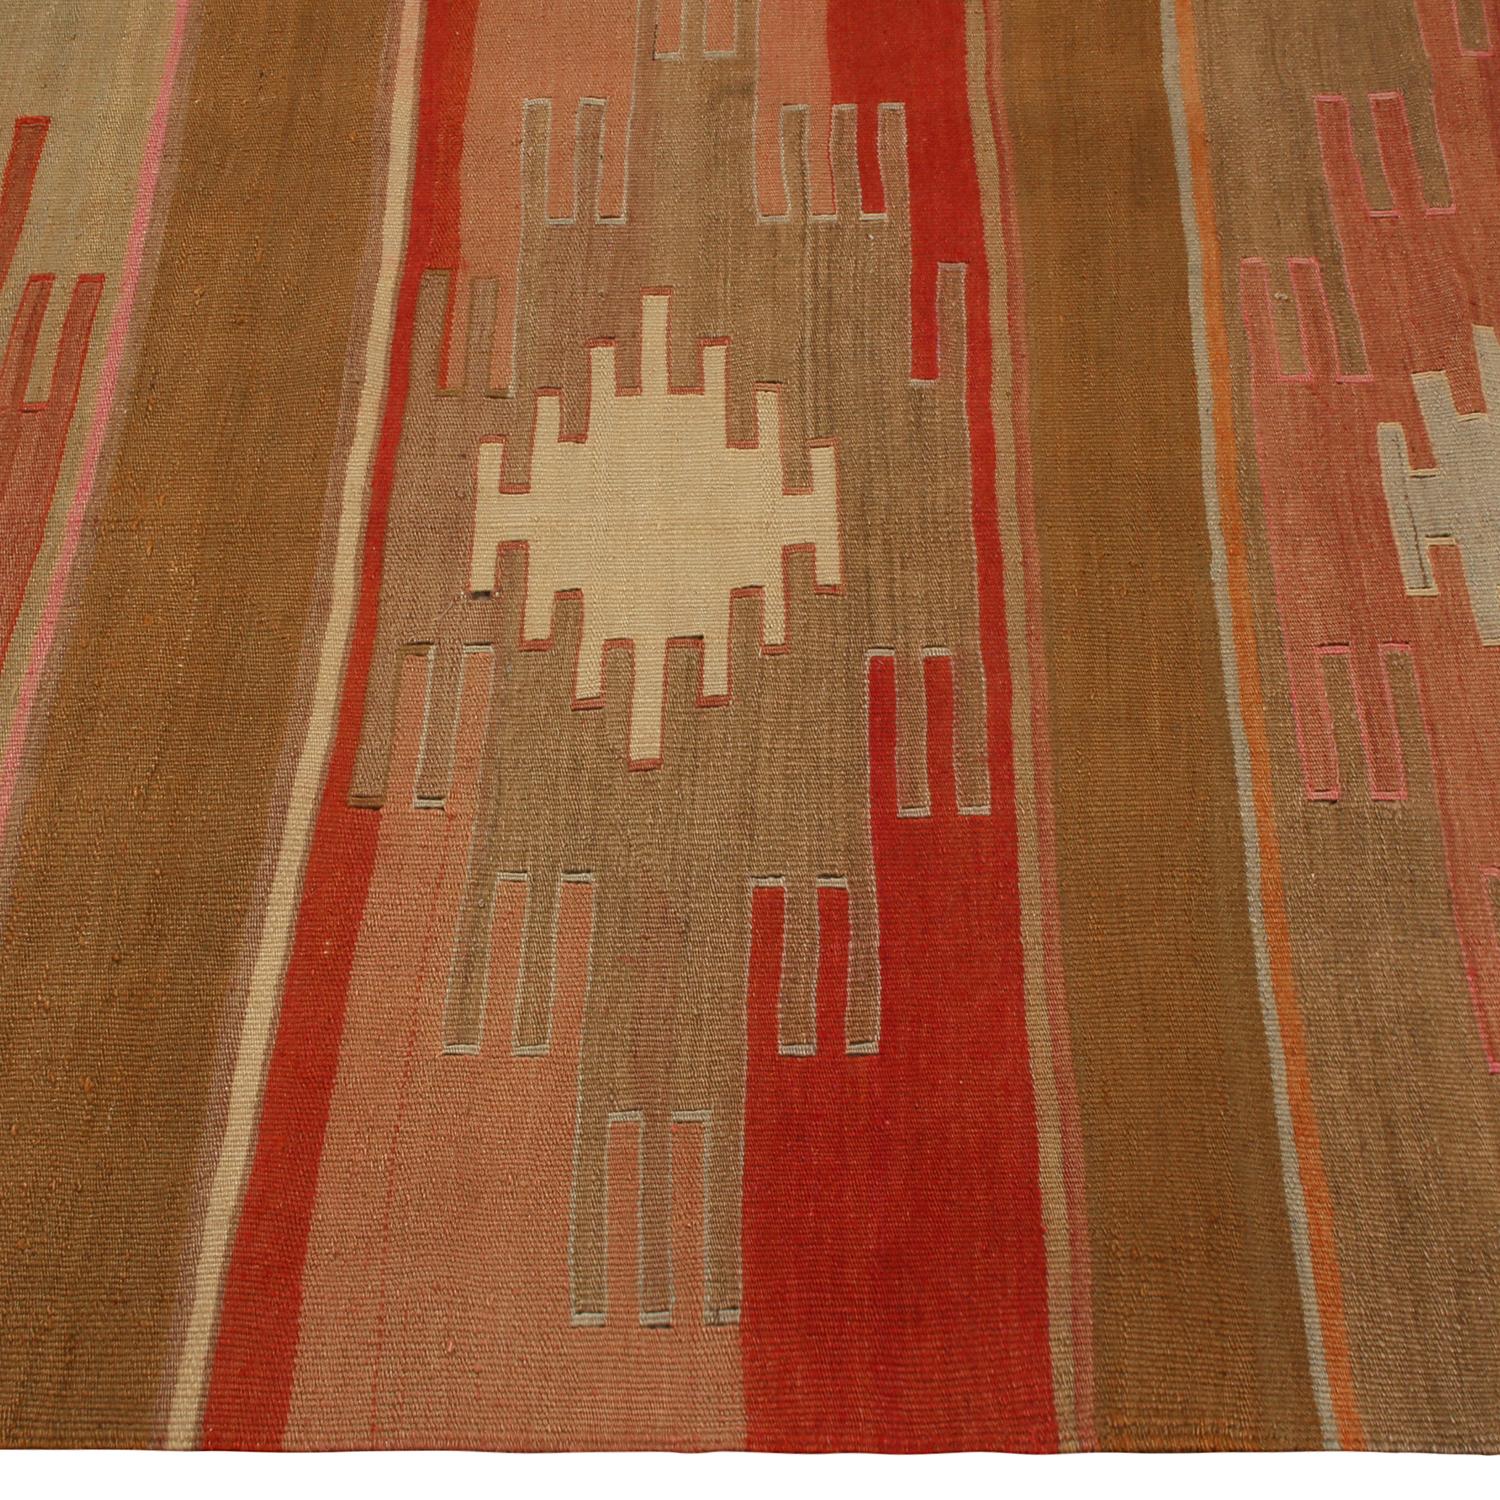 Hailing from Turkey between 1930-1940, this vintage Sivas Kilim rug marries a tasteful, Classic geometric pattern with a rich, unique variation of colorways, enjoying beautifully abrashed crimson and burgundy red, moss and mint green, navy and